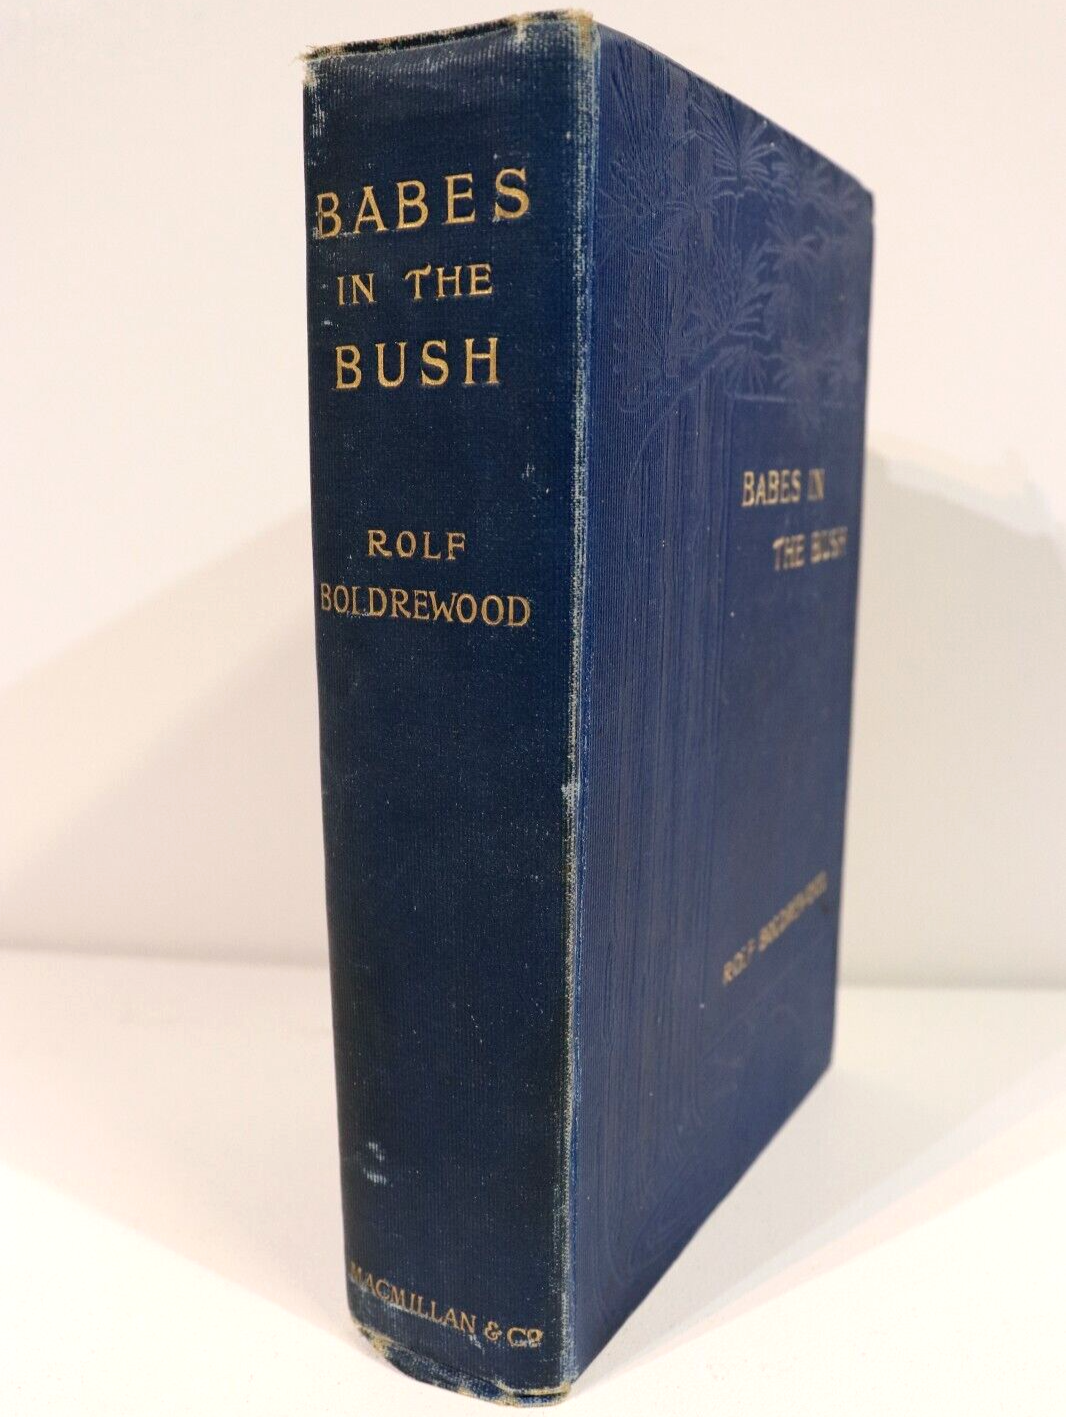 1900 Babes In The Bush by Rolf Boldrewood Antique Australian Fiction Book